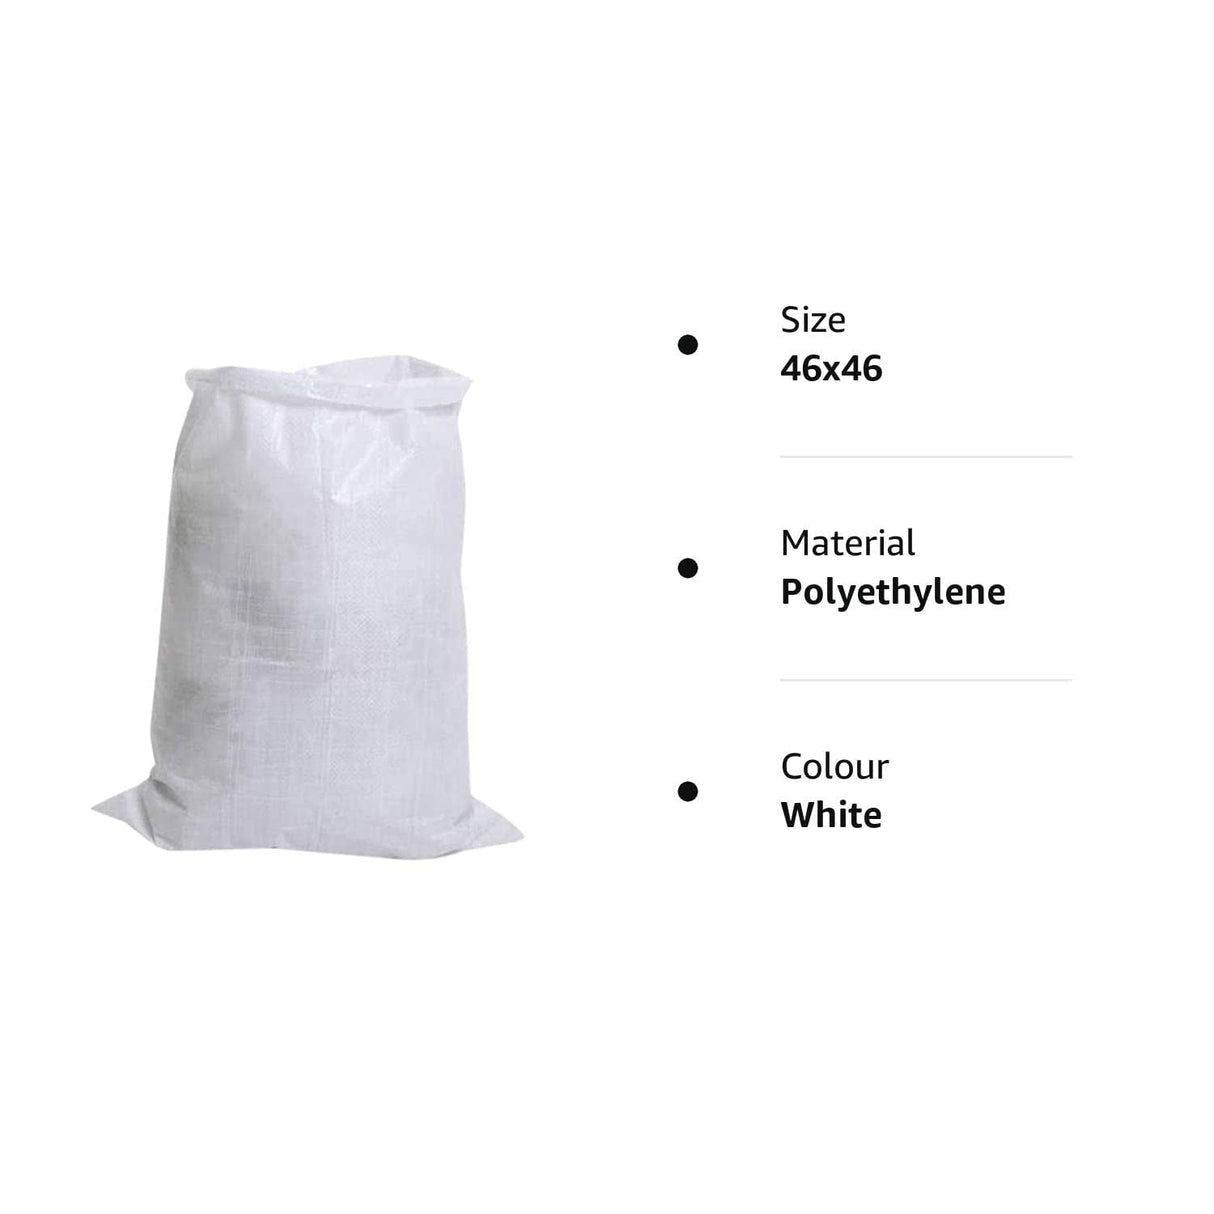 Empty HDPE White Bag, Bora, Bori for Packing of Food, Vegetables, Grains, Wheat, Rice, Sugar etc Products (46x46 Inch, Pack of 5)